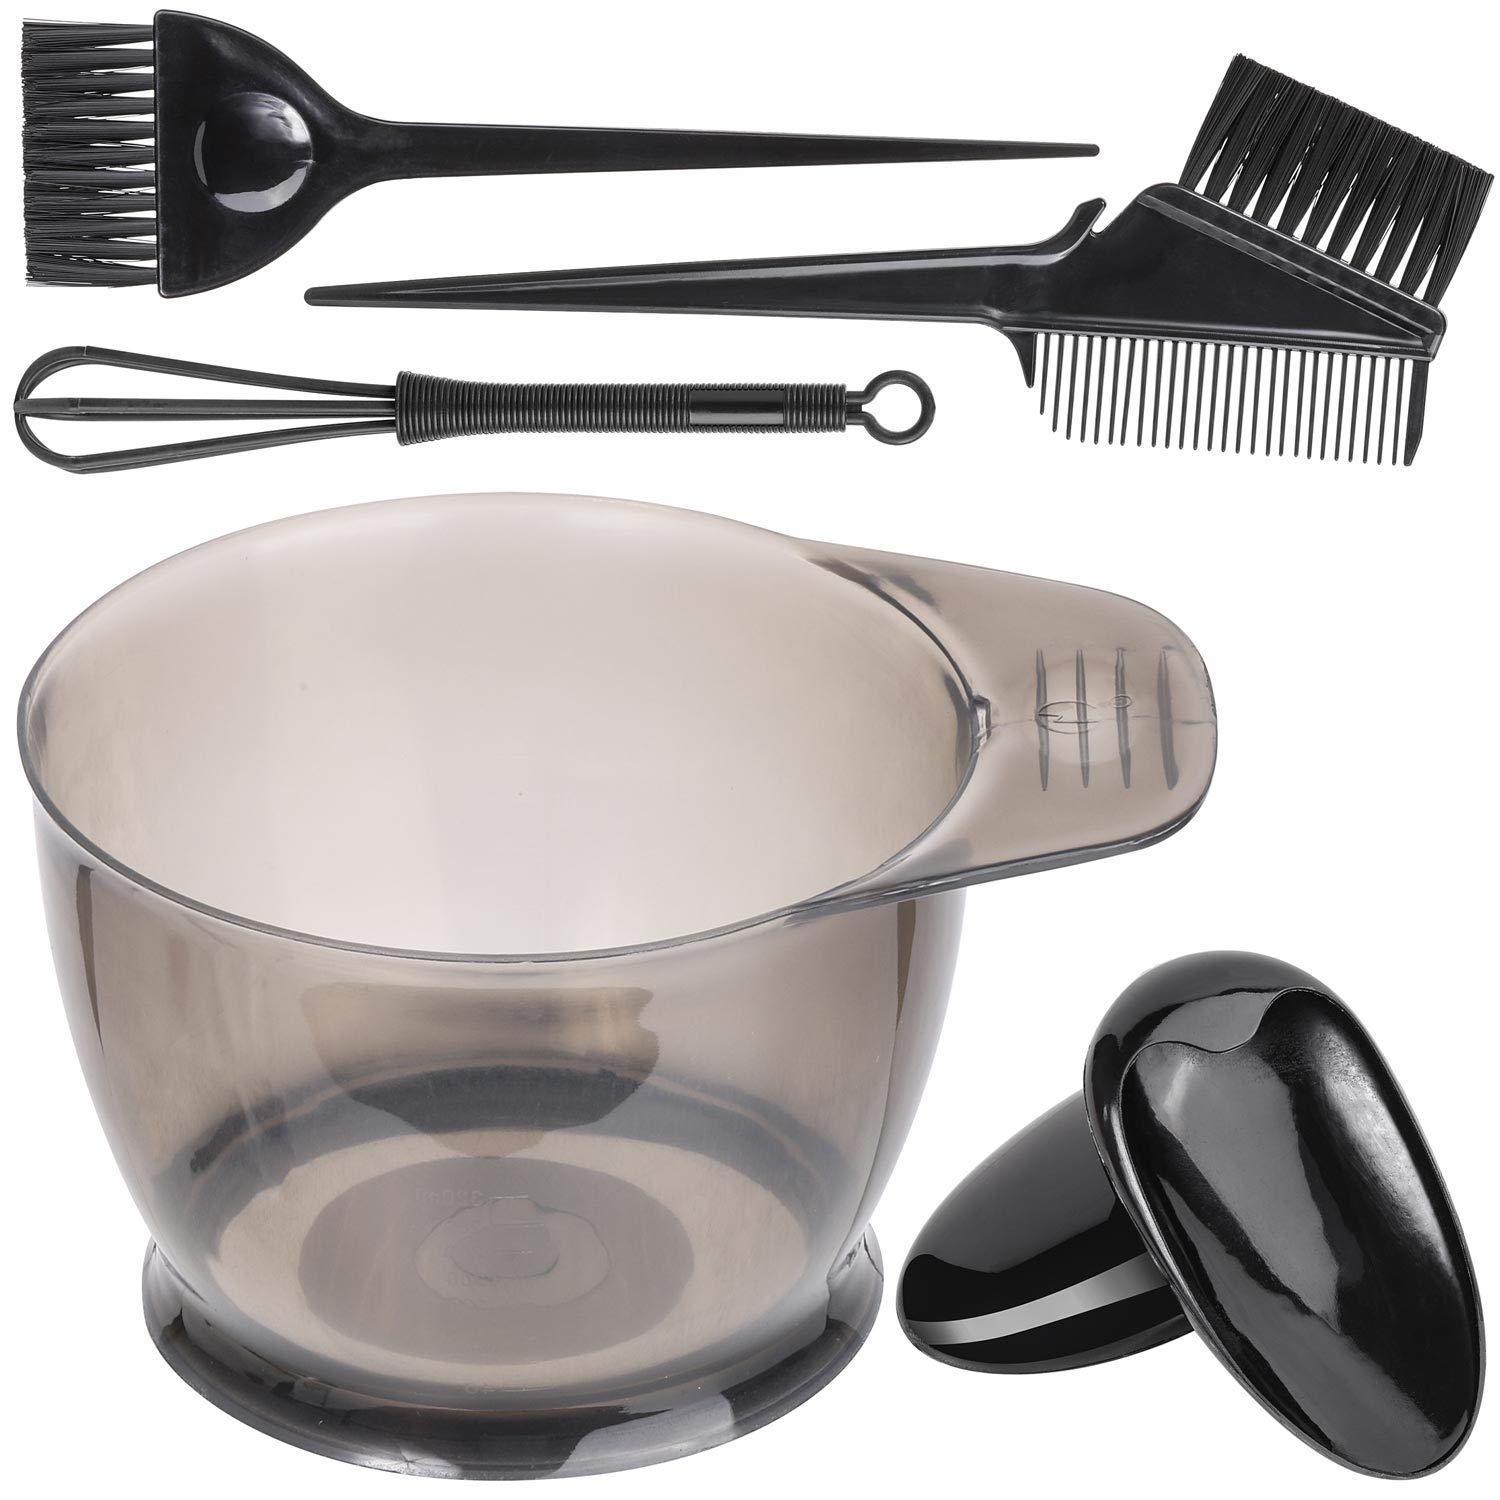 5 Pcs Professional Hair Coloring Dyeing Kit for Salon and Home - Dye Brush  Comb,Tinting Bowl,